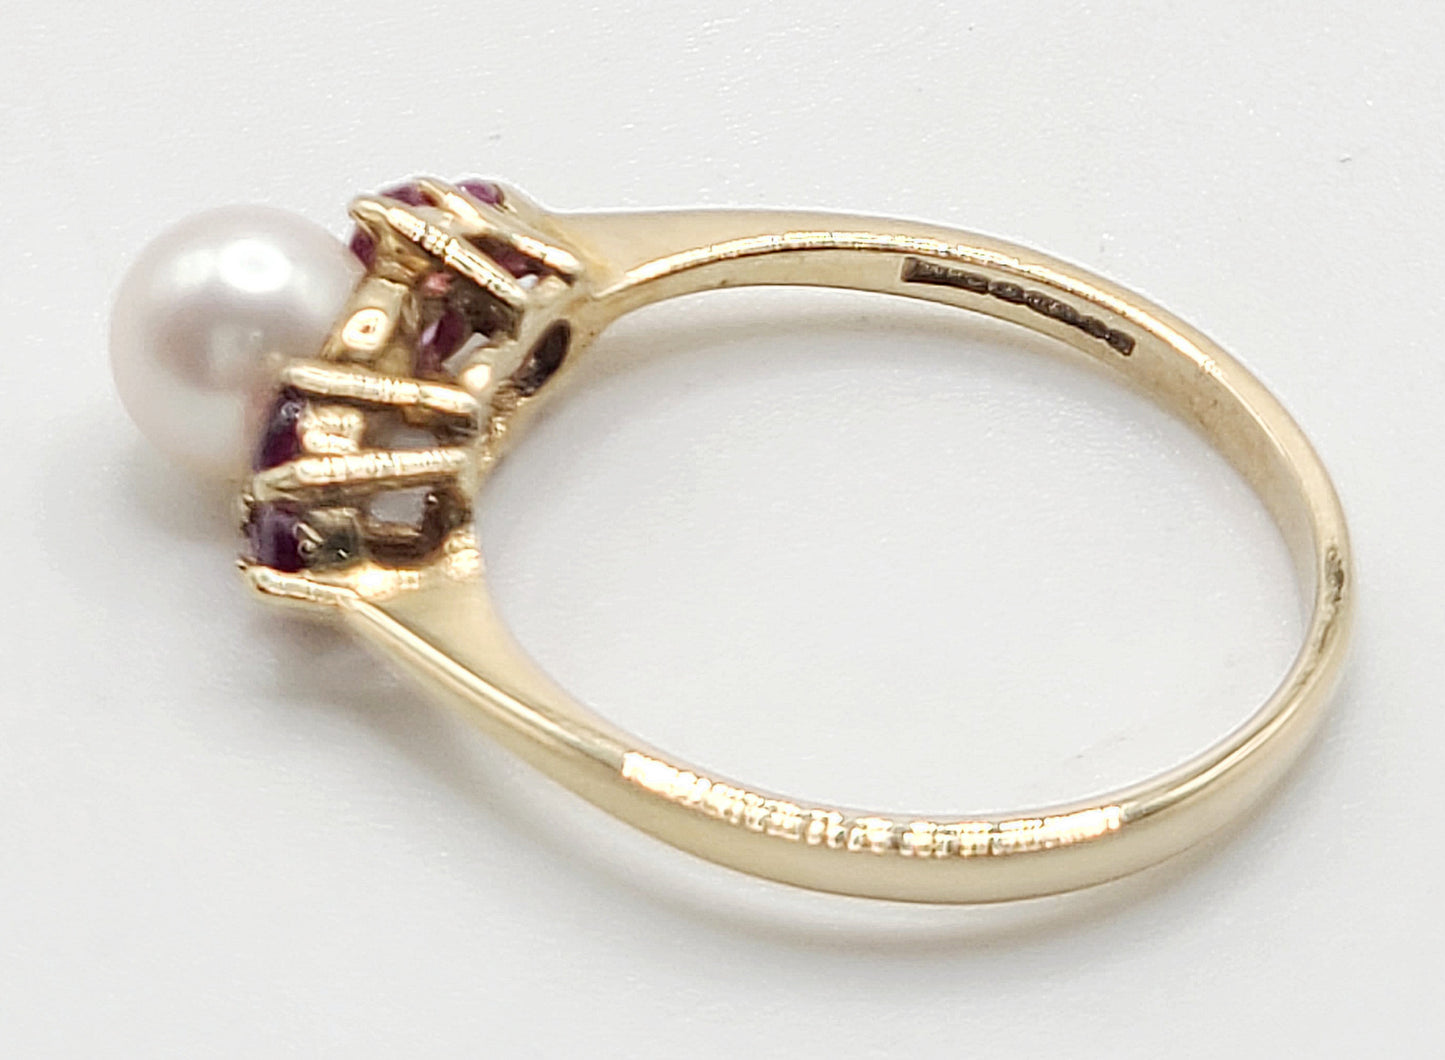 Pearl & Ruby Trio Cluster on 9ct Gold Ring - size N